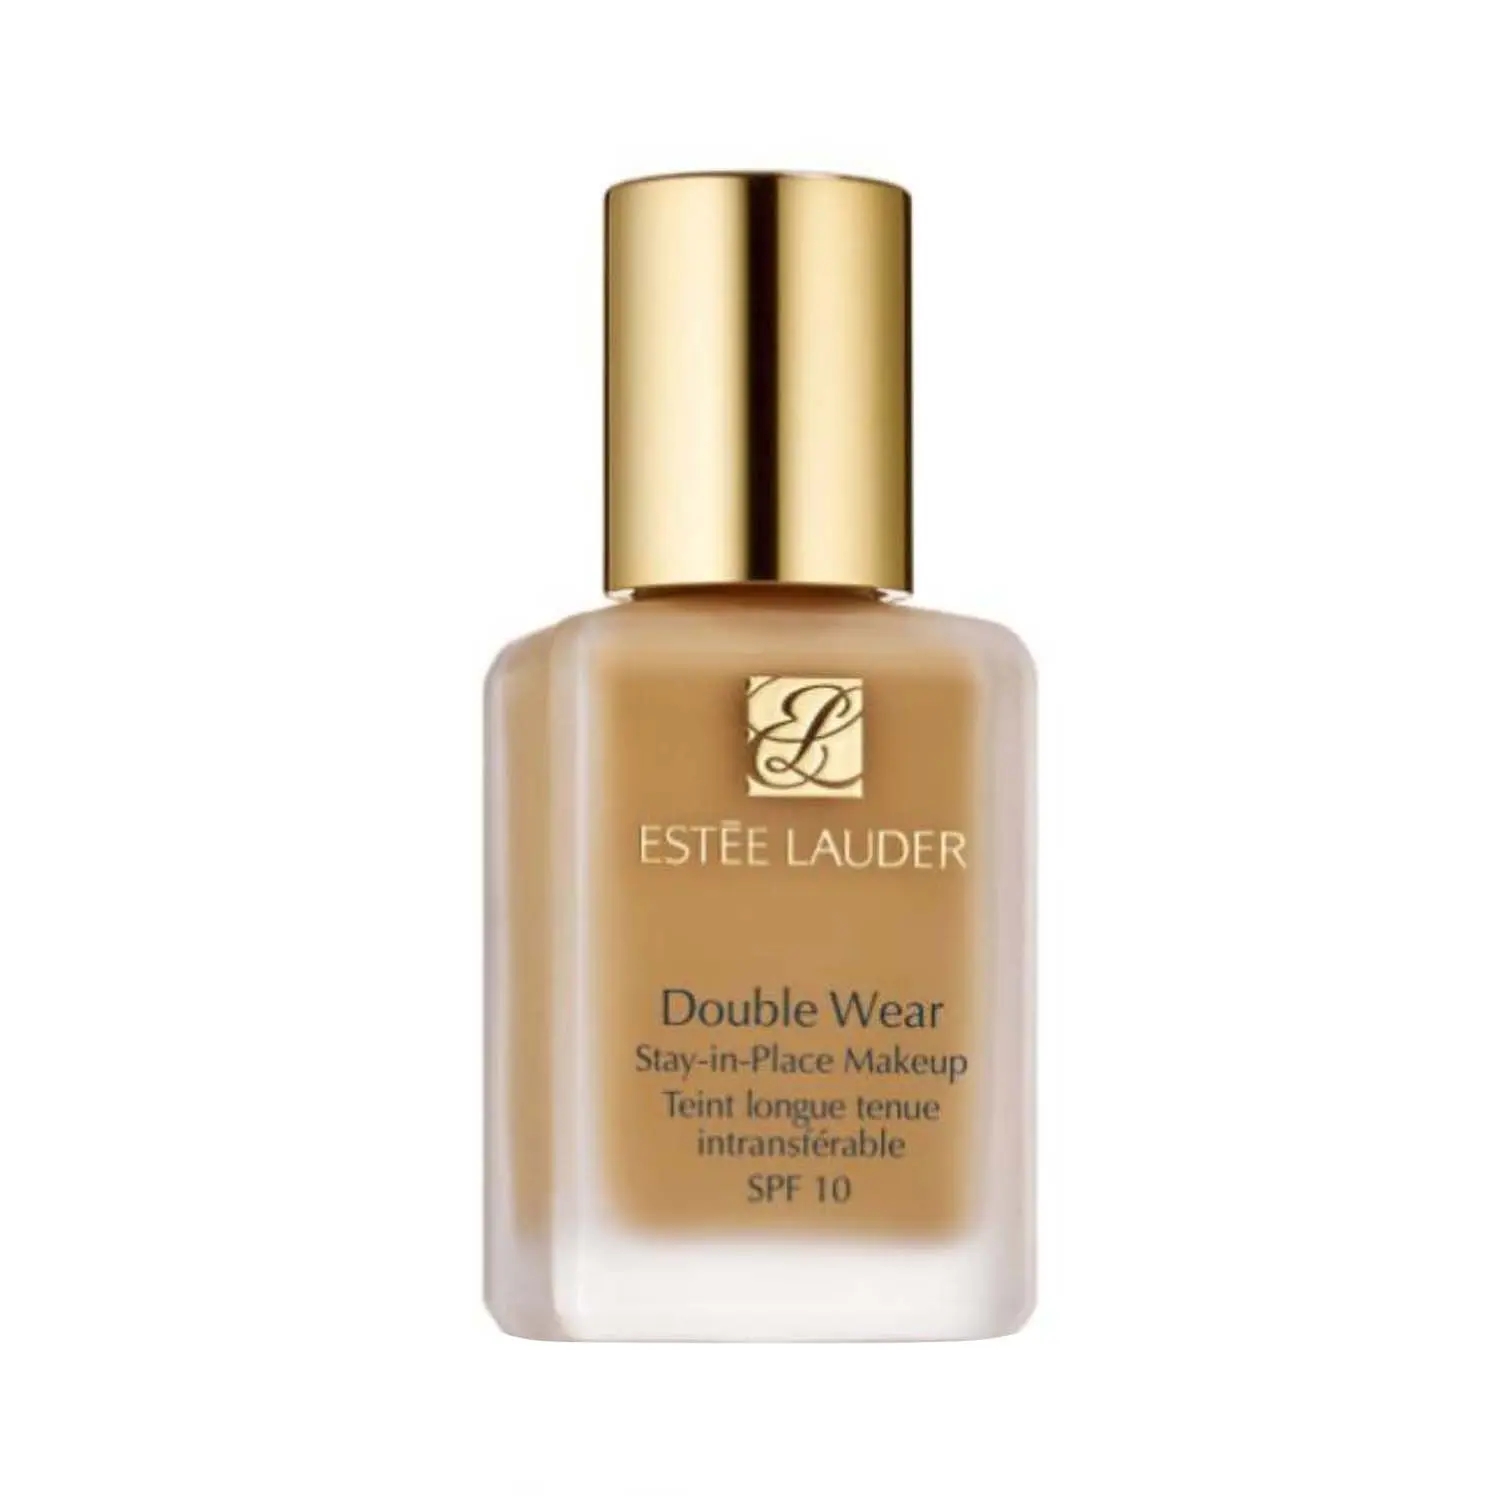 Estee Lauder | Estee Lauder Double Wear Stay-In-Place Makeup Foundation SPF 10 - 3W1 Tawny (30ml)